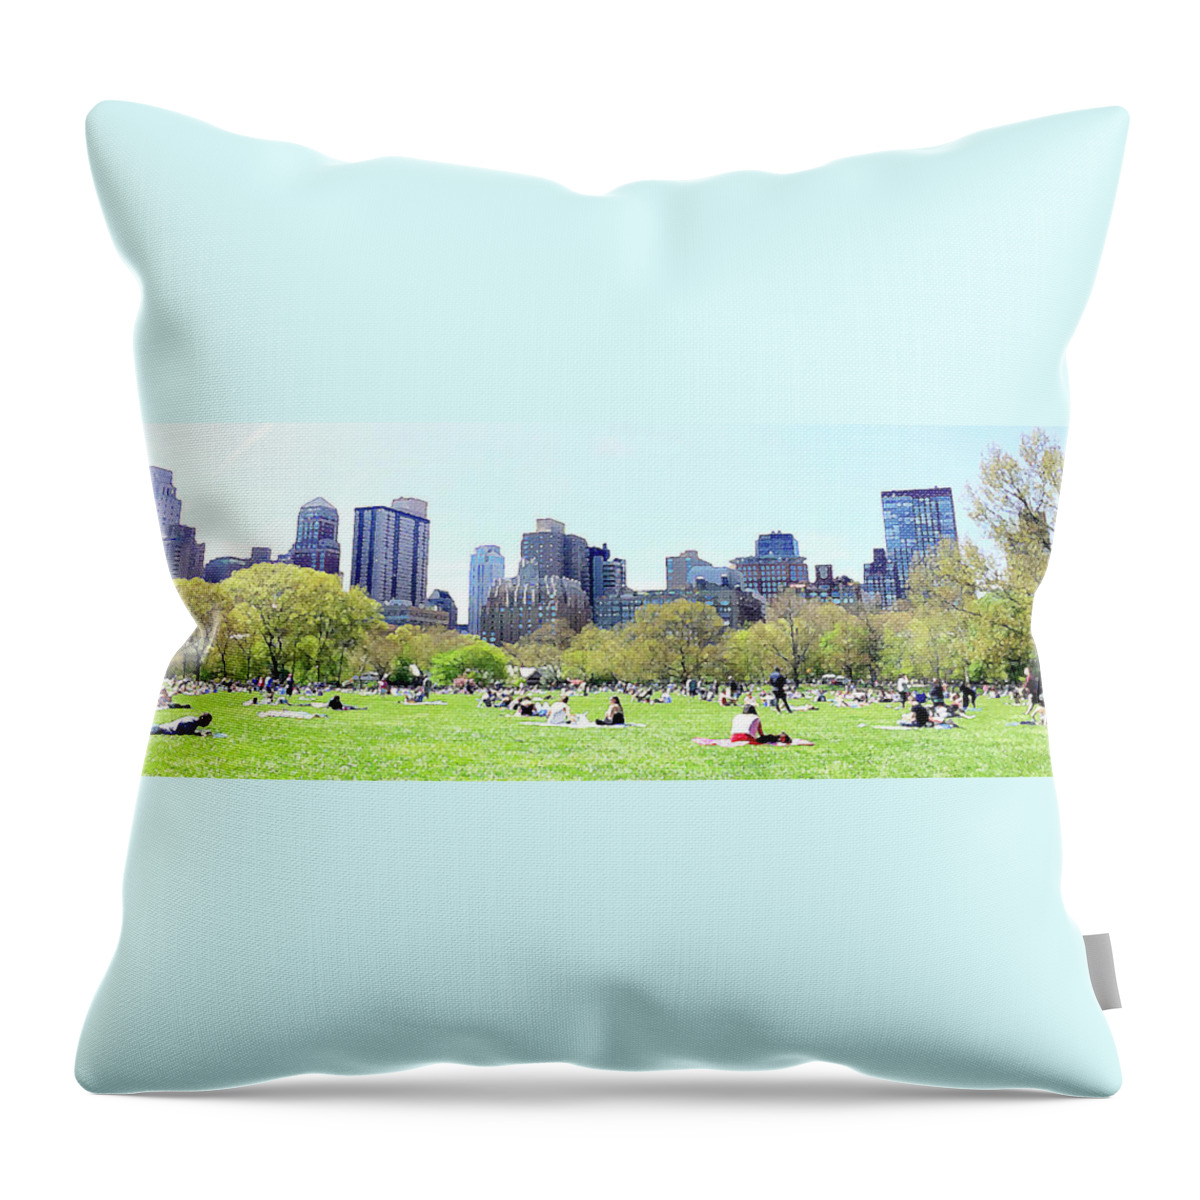 Central Throw Pillow featuring the photograph Central Park Picnic by Acosta